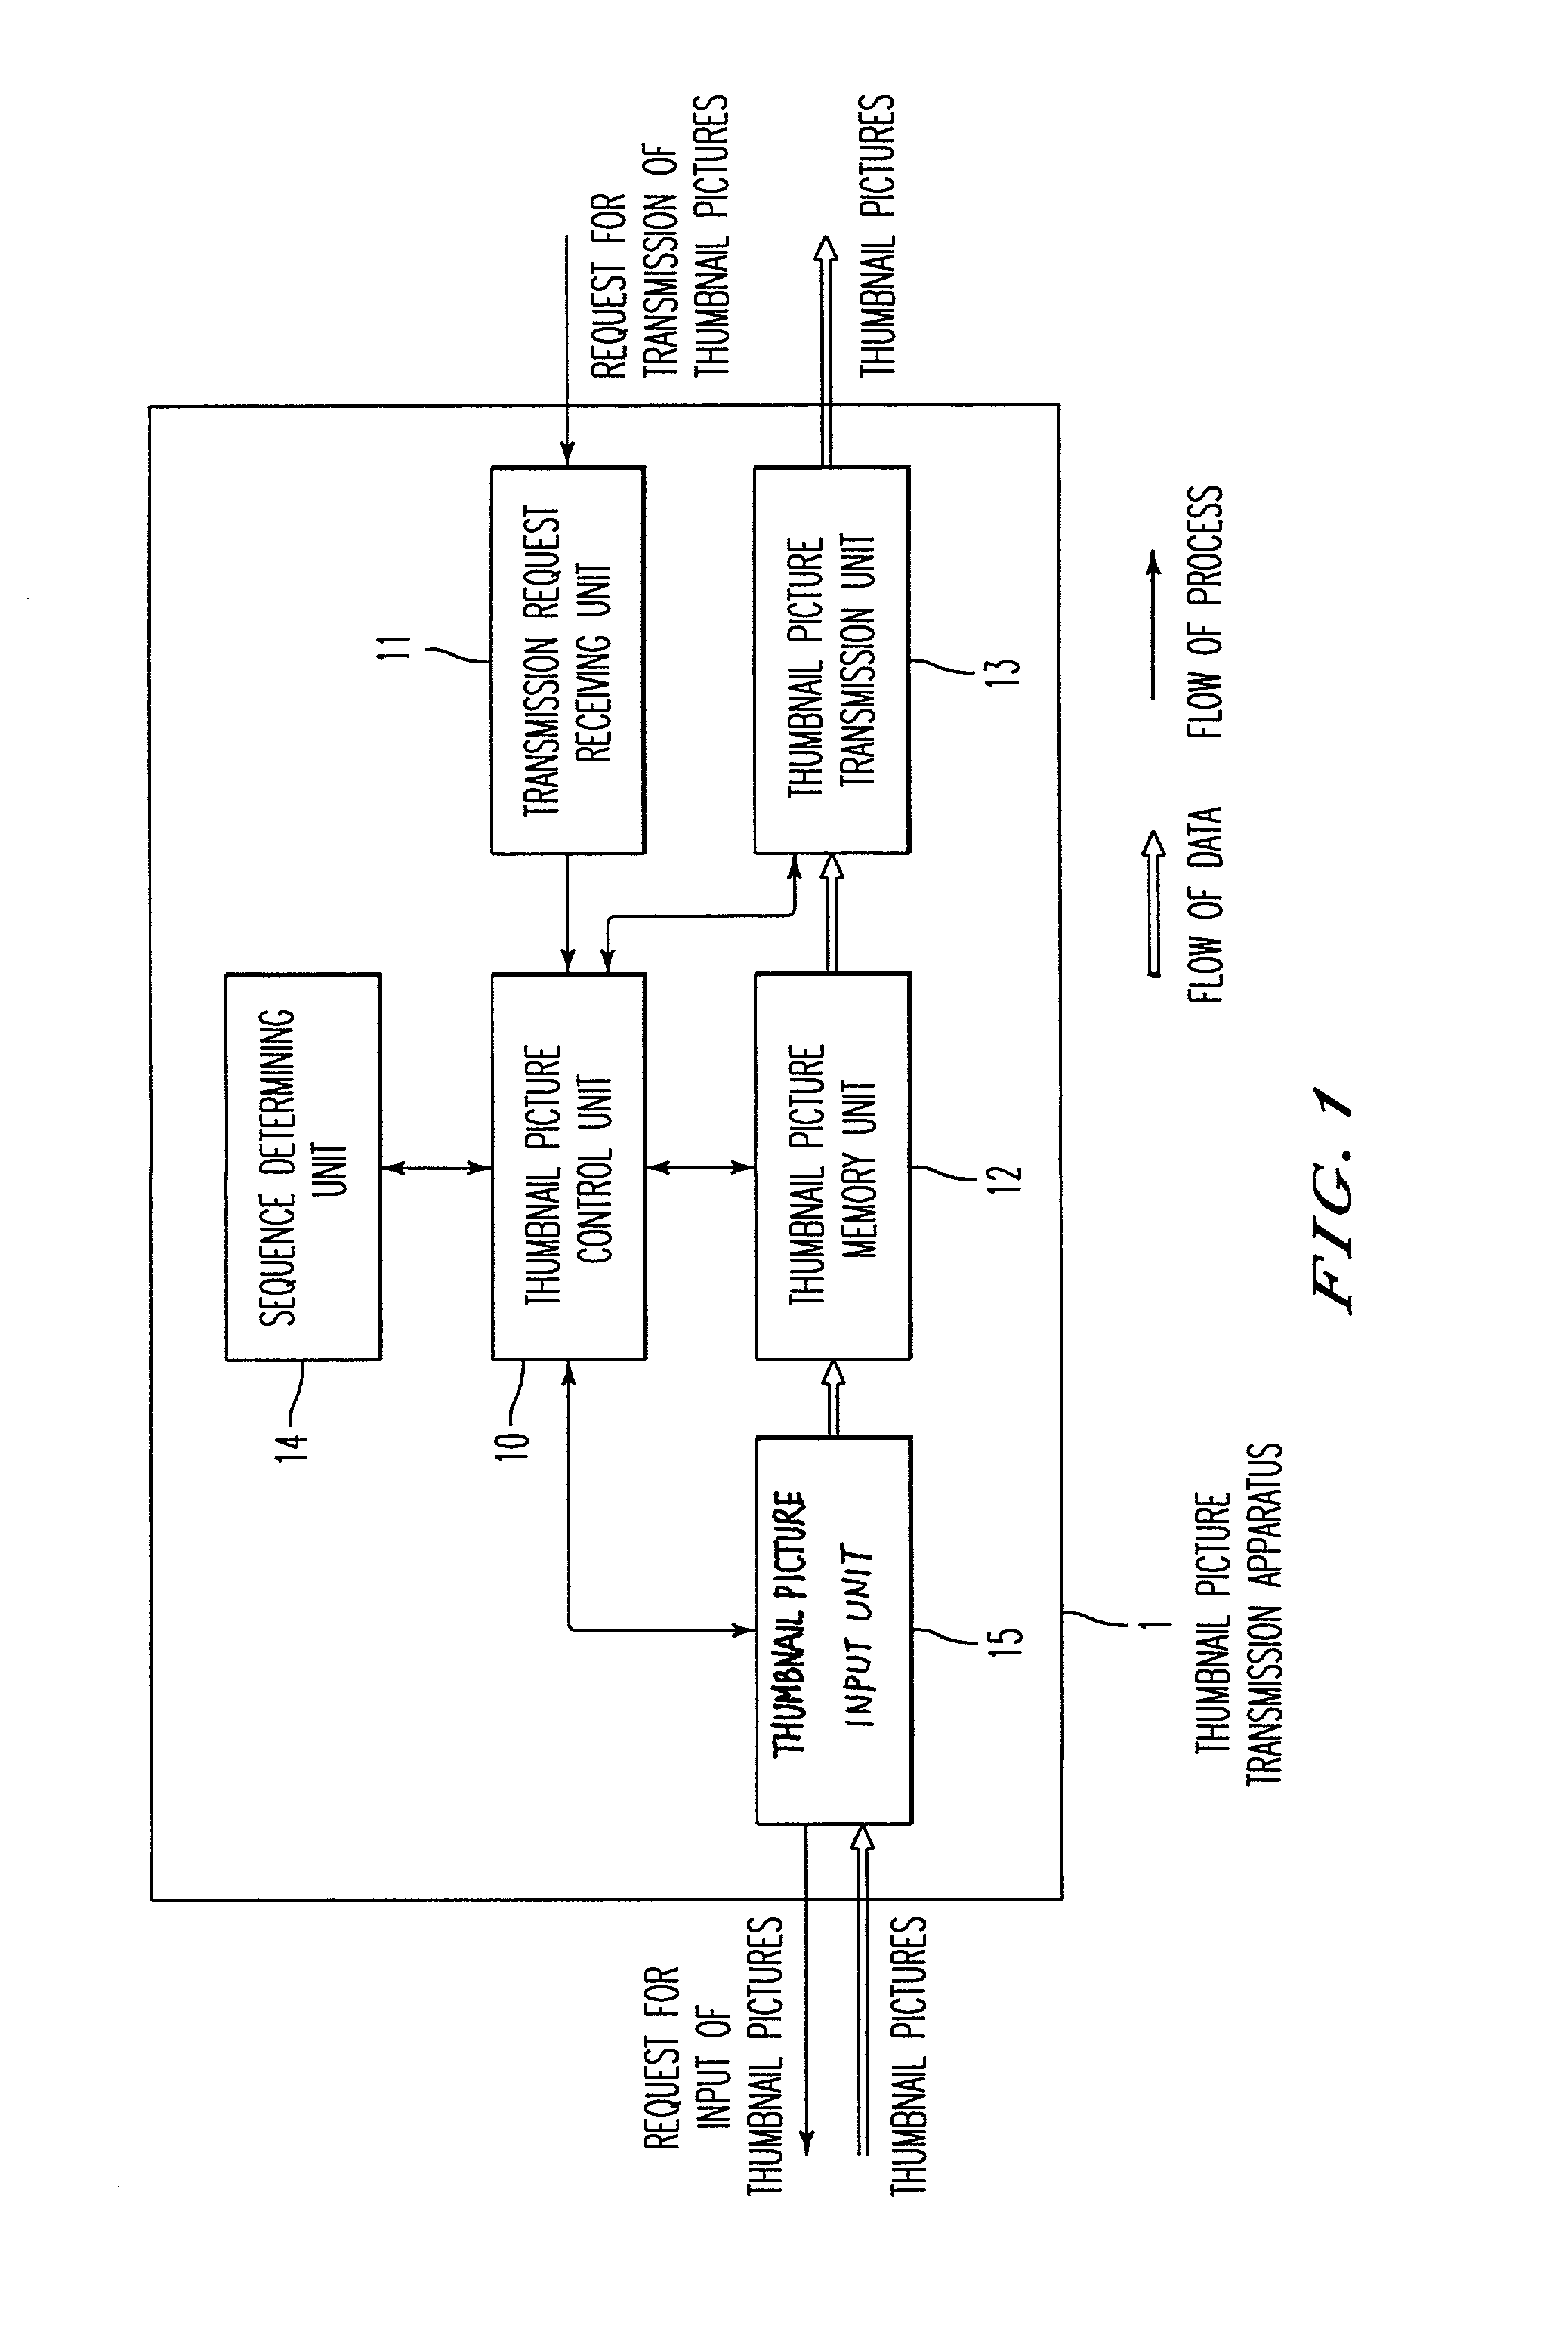 Apparatus and method for picture transmission and display